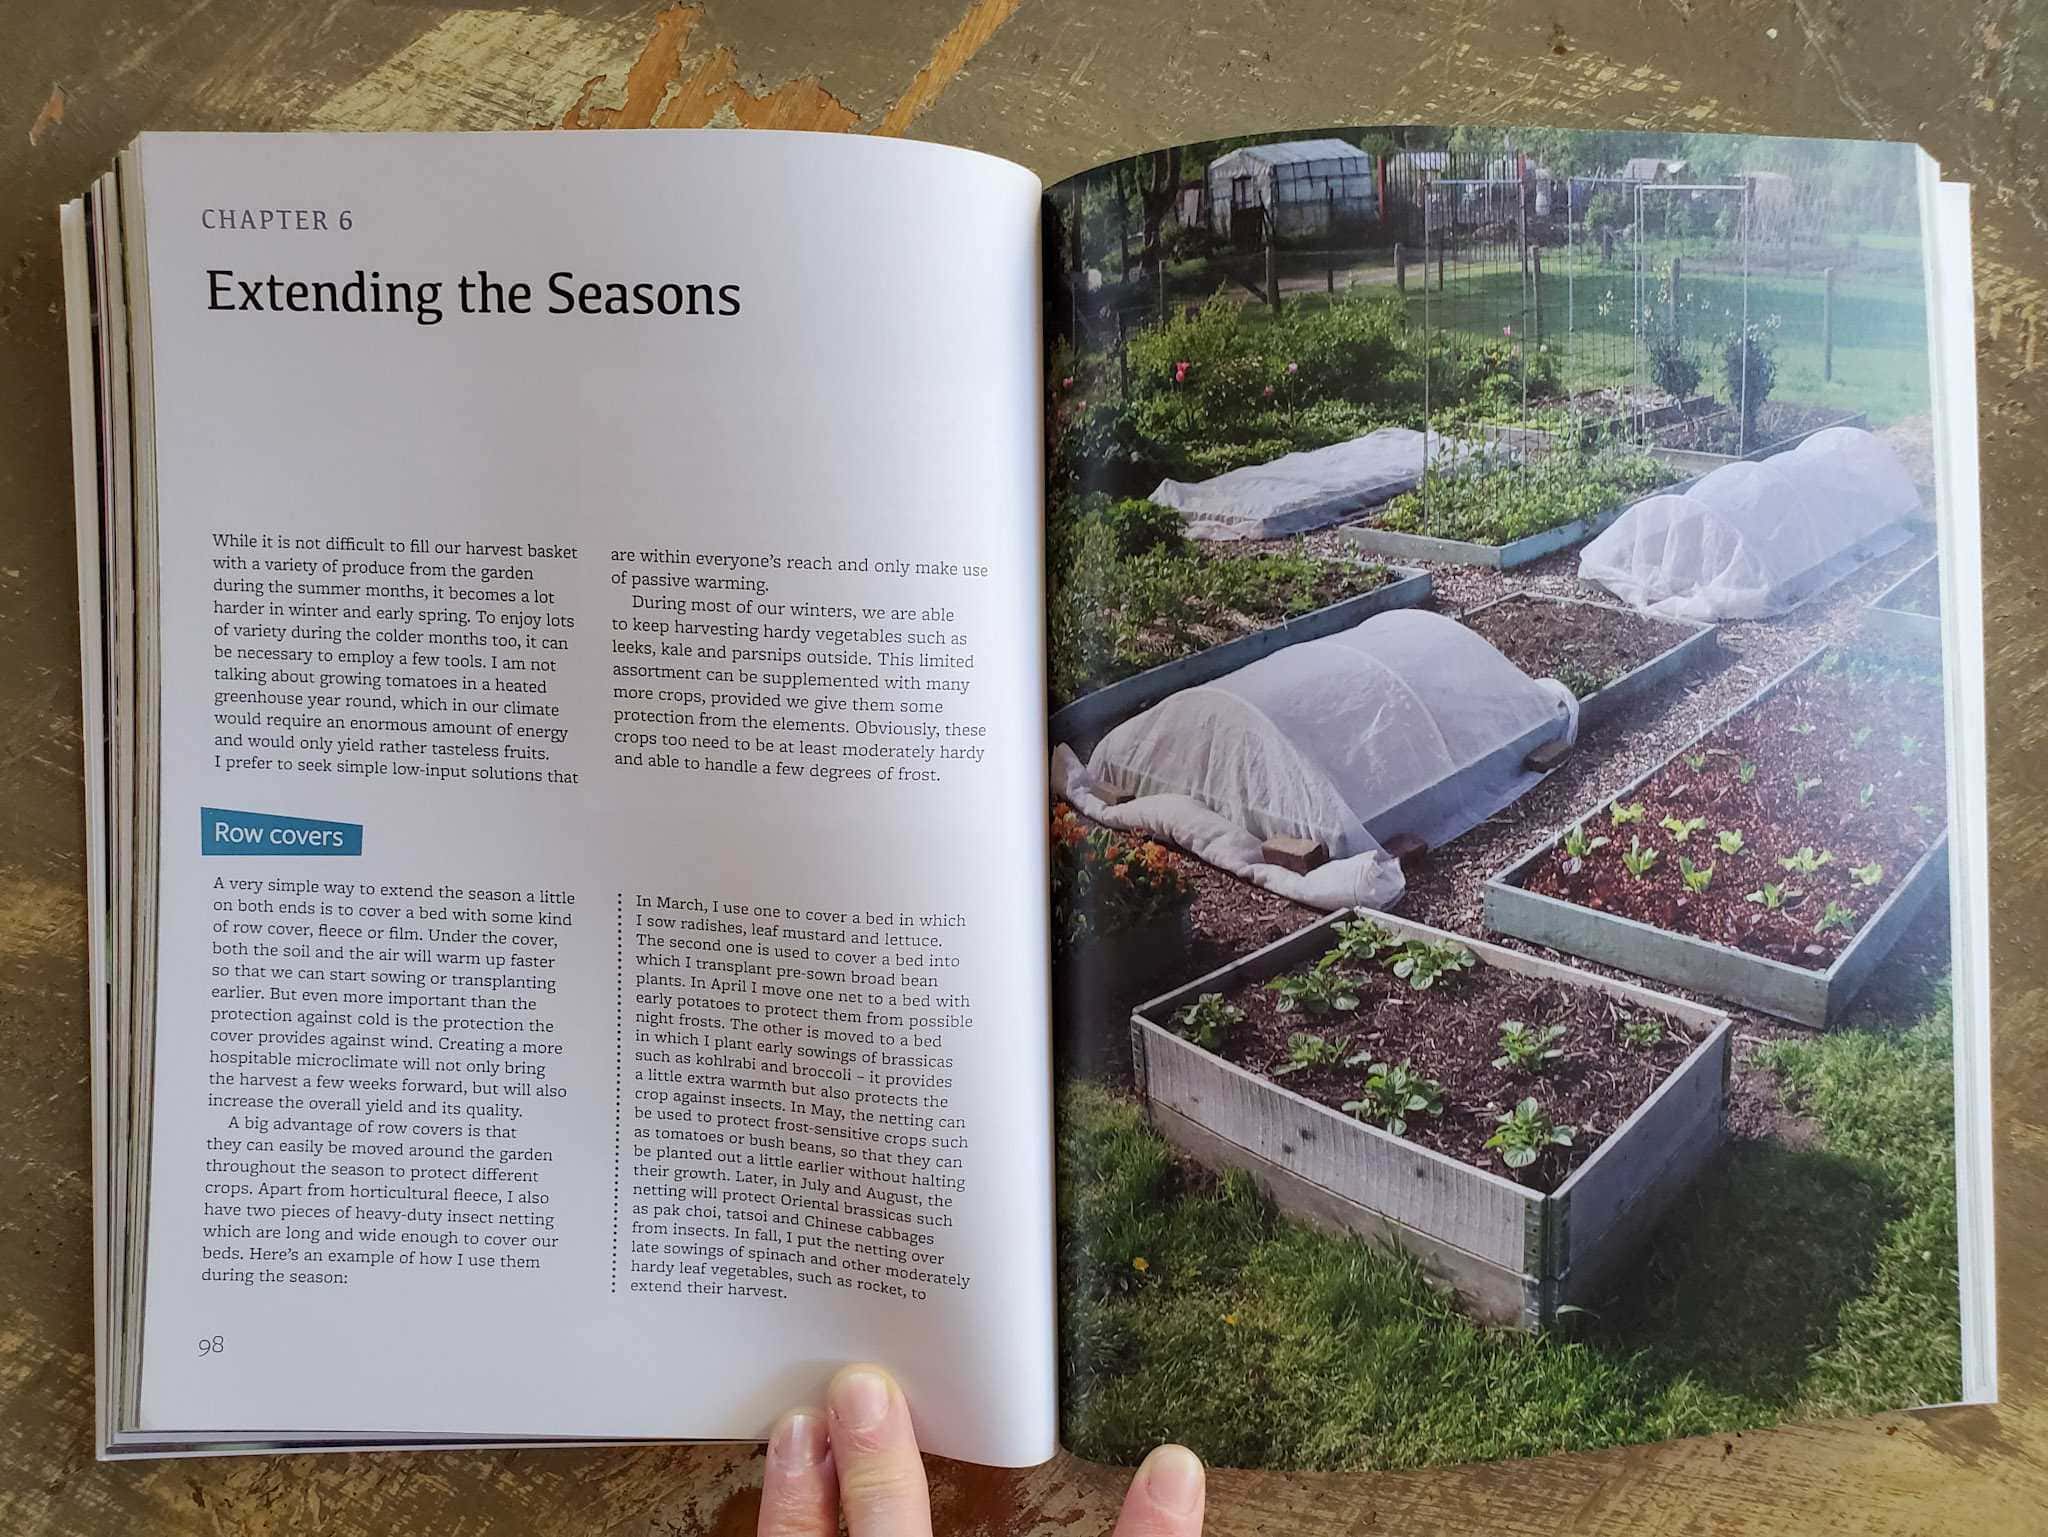 A gardening book is open to a section about "Extending the Seasons". One page is a full photograph of garden beds, some are left uncovered while others are covered in row covers, and some have wire trellises.  